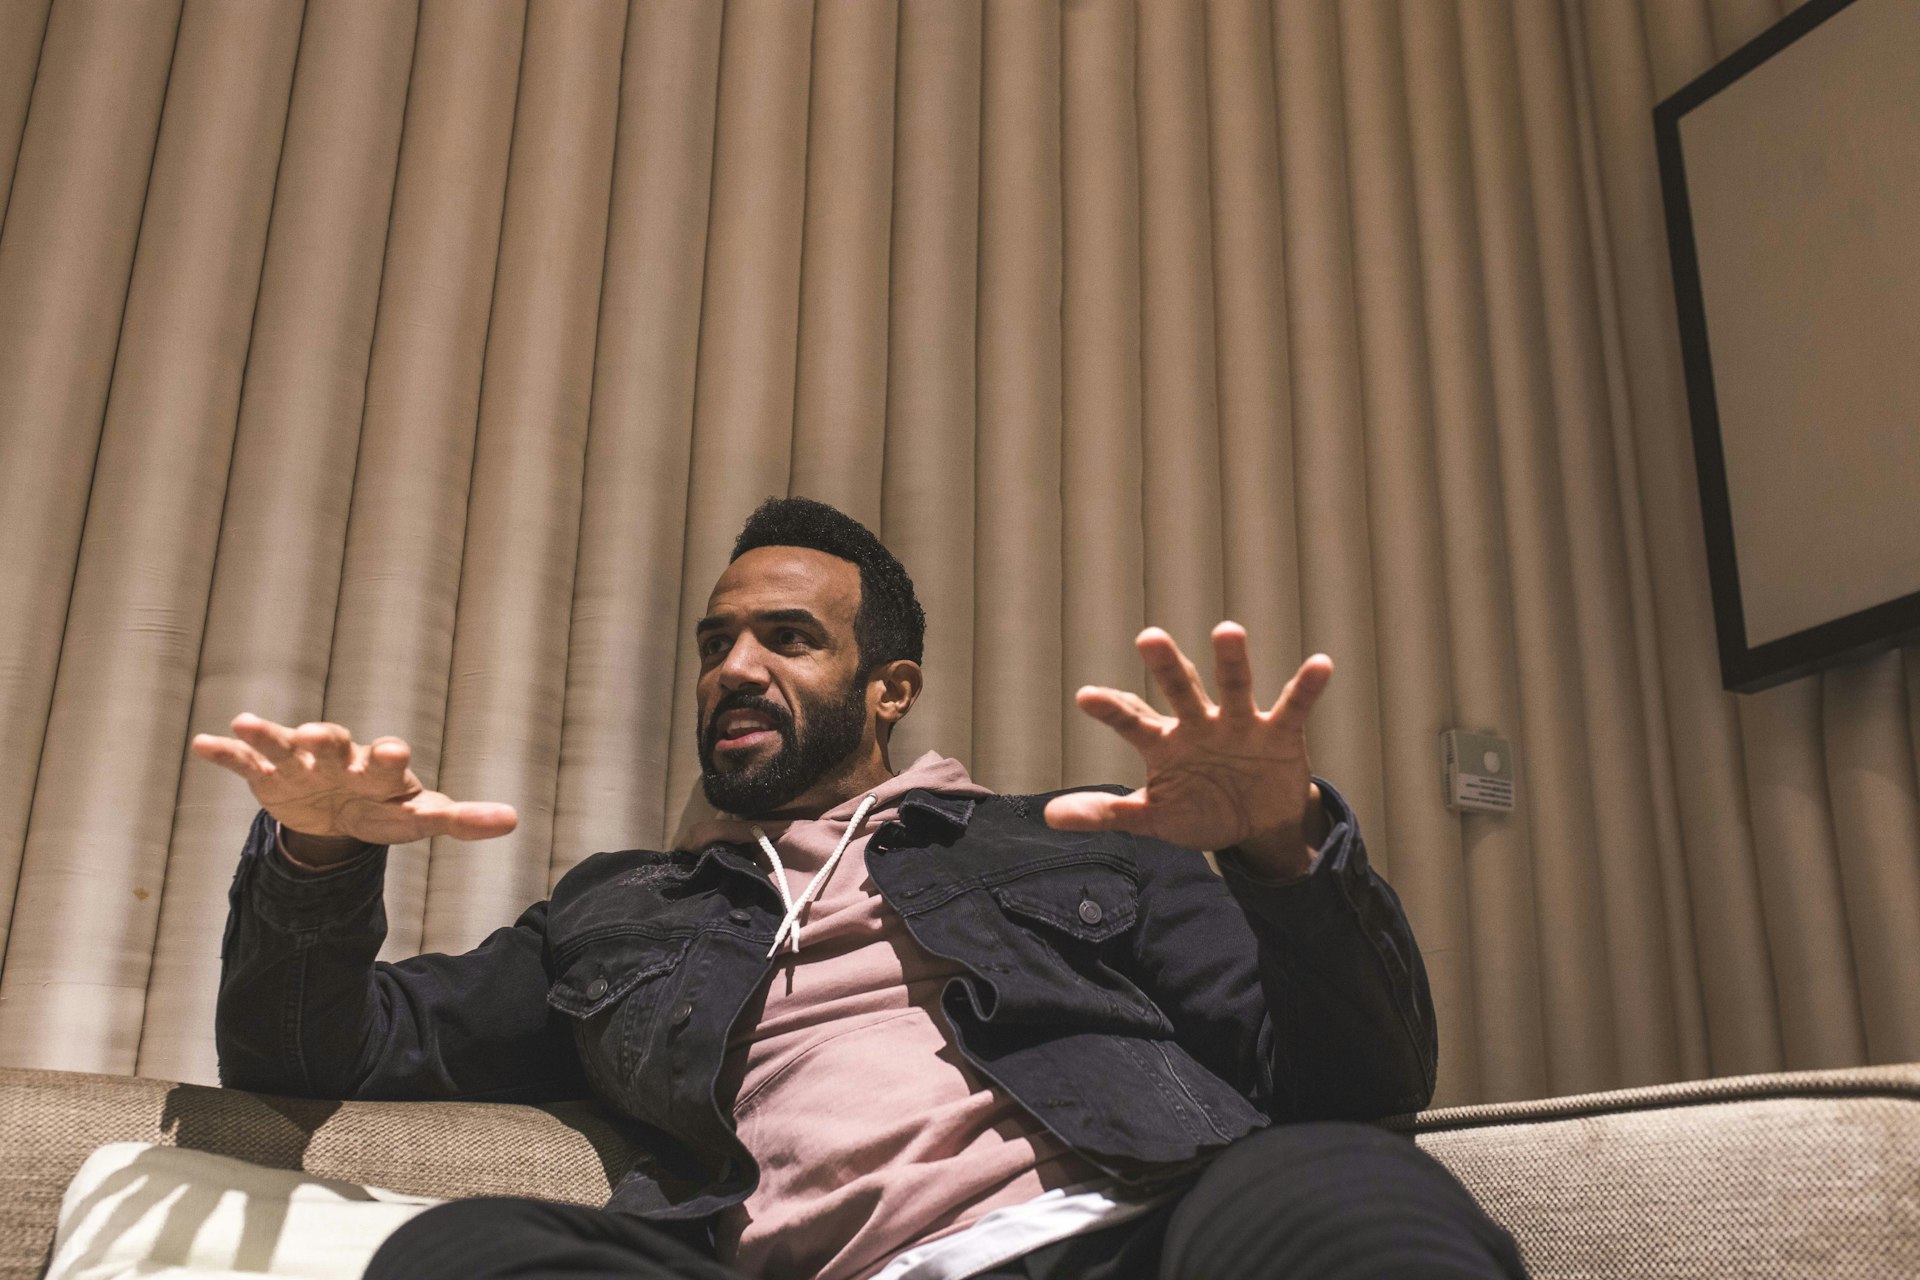 Is Craig David still a Tory? We try to find out